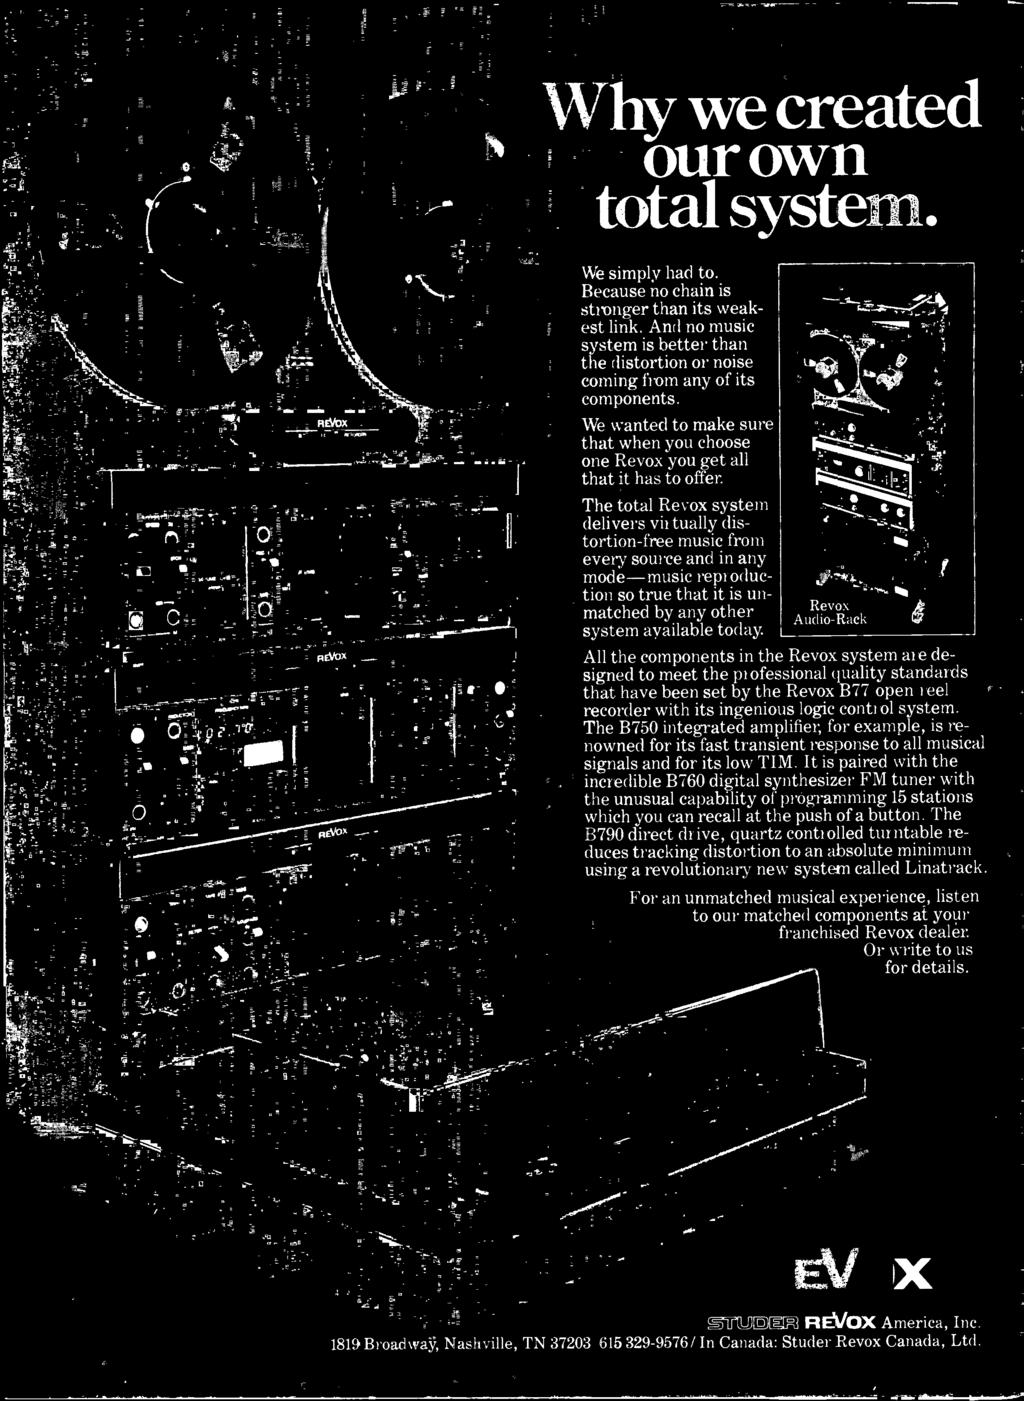 control system. The B750 integrated amplifier, for example, is renowned for its fast transient response to all musical signals and for its low TIM.